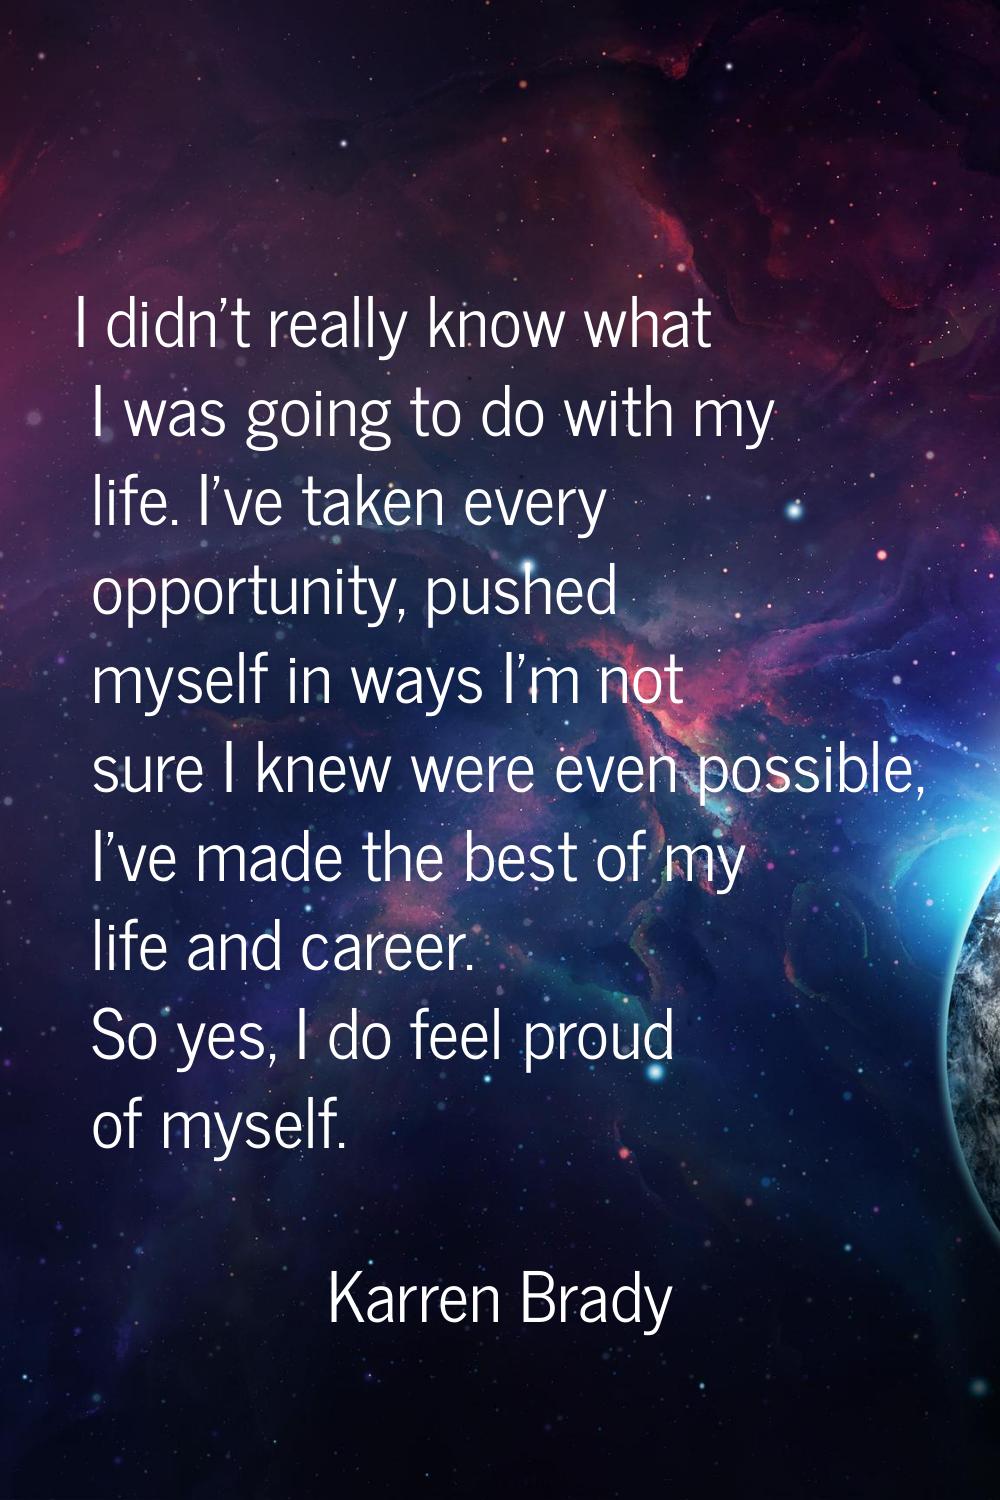 I didn't really know what I was going to do with my life. I've taken every opportunity, pushed myse